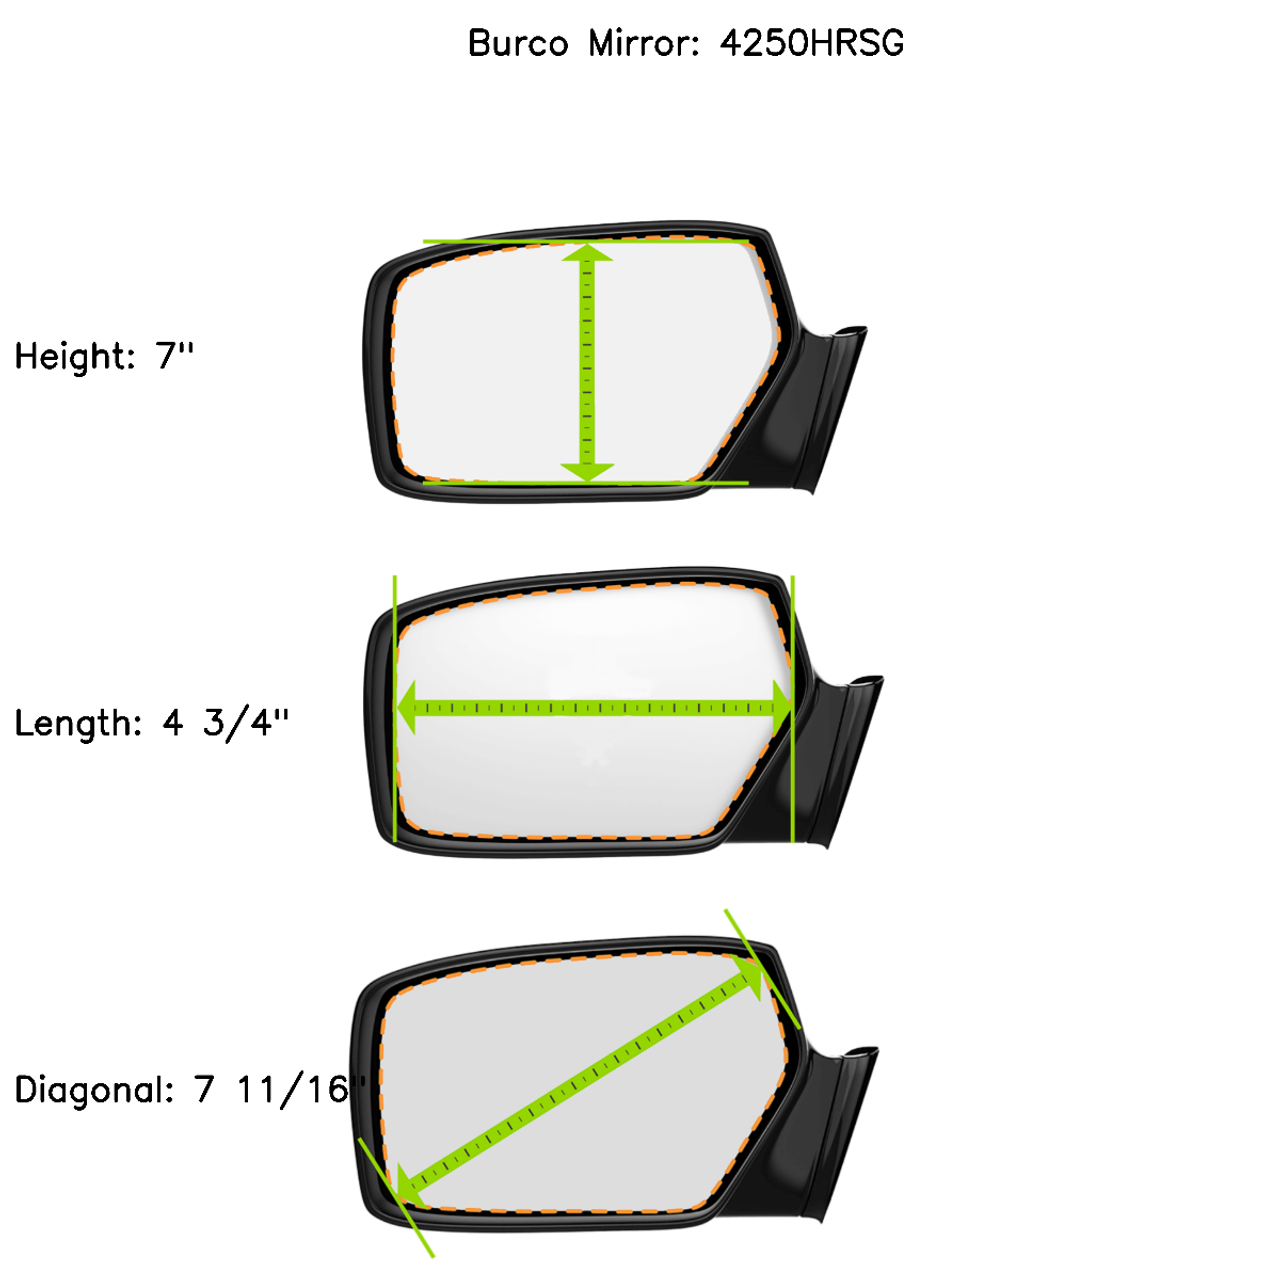 Compatible with Audi A3, A4, A5, S4, S5, S6, S8, AllRoad Quattro Left Driver Heated* Mirror Glass w/Rear Motor Mount Bracket 2 Options See Details